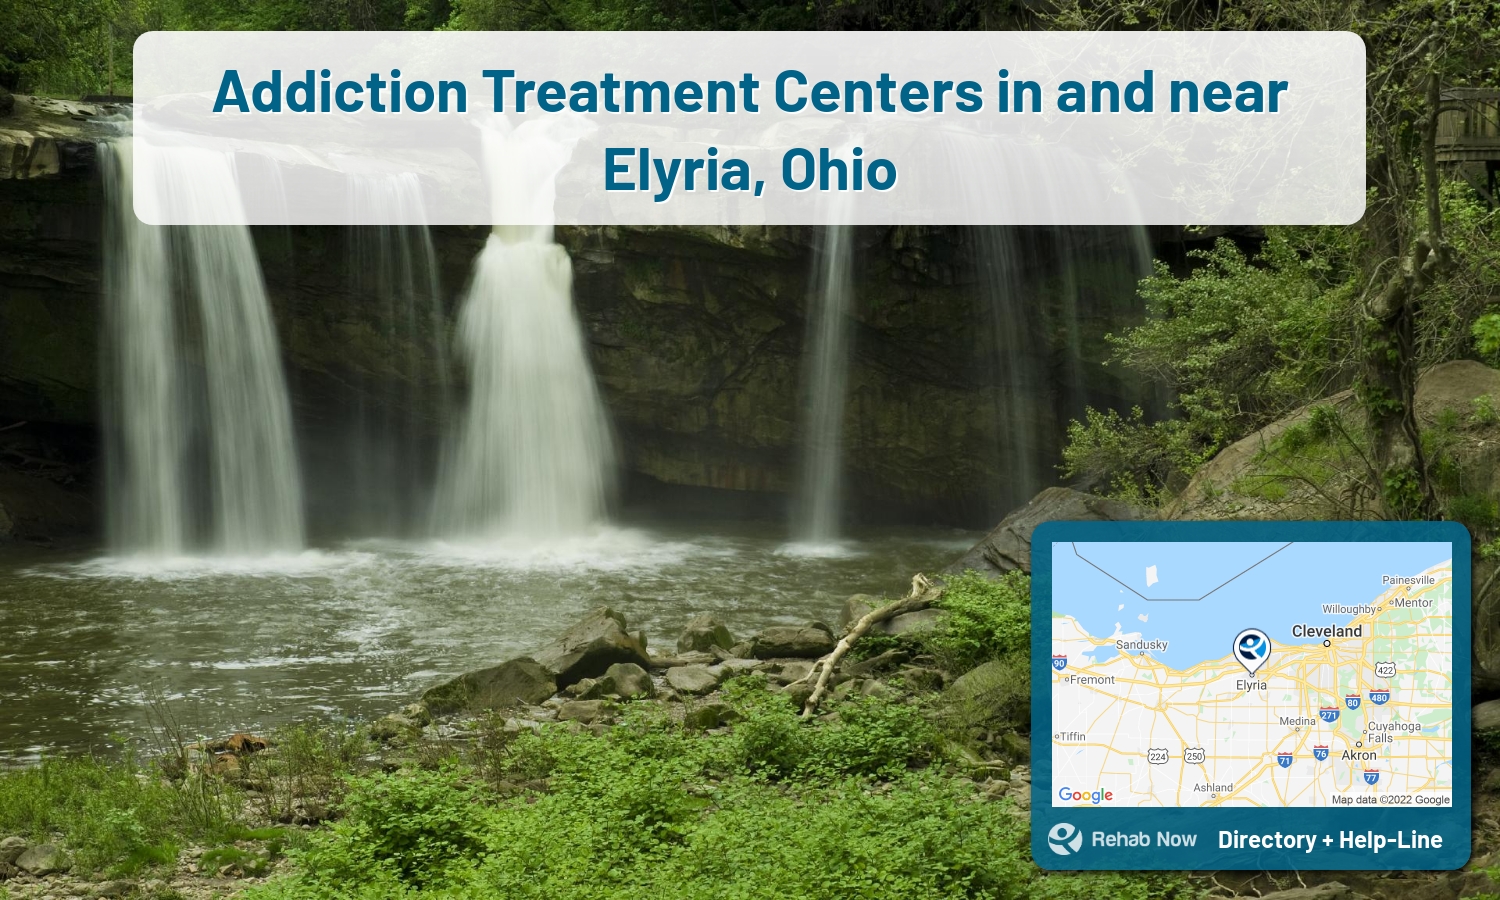 List of alcohol and drug treatment centers near you in Elyria, Ohio. Research certifications, programs, methods, pricing, and more.